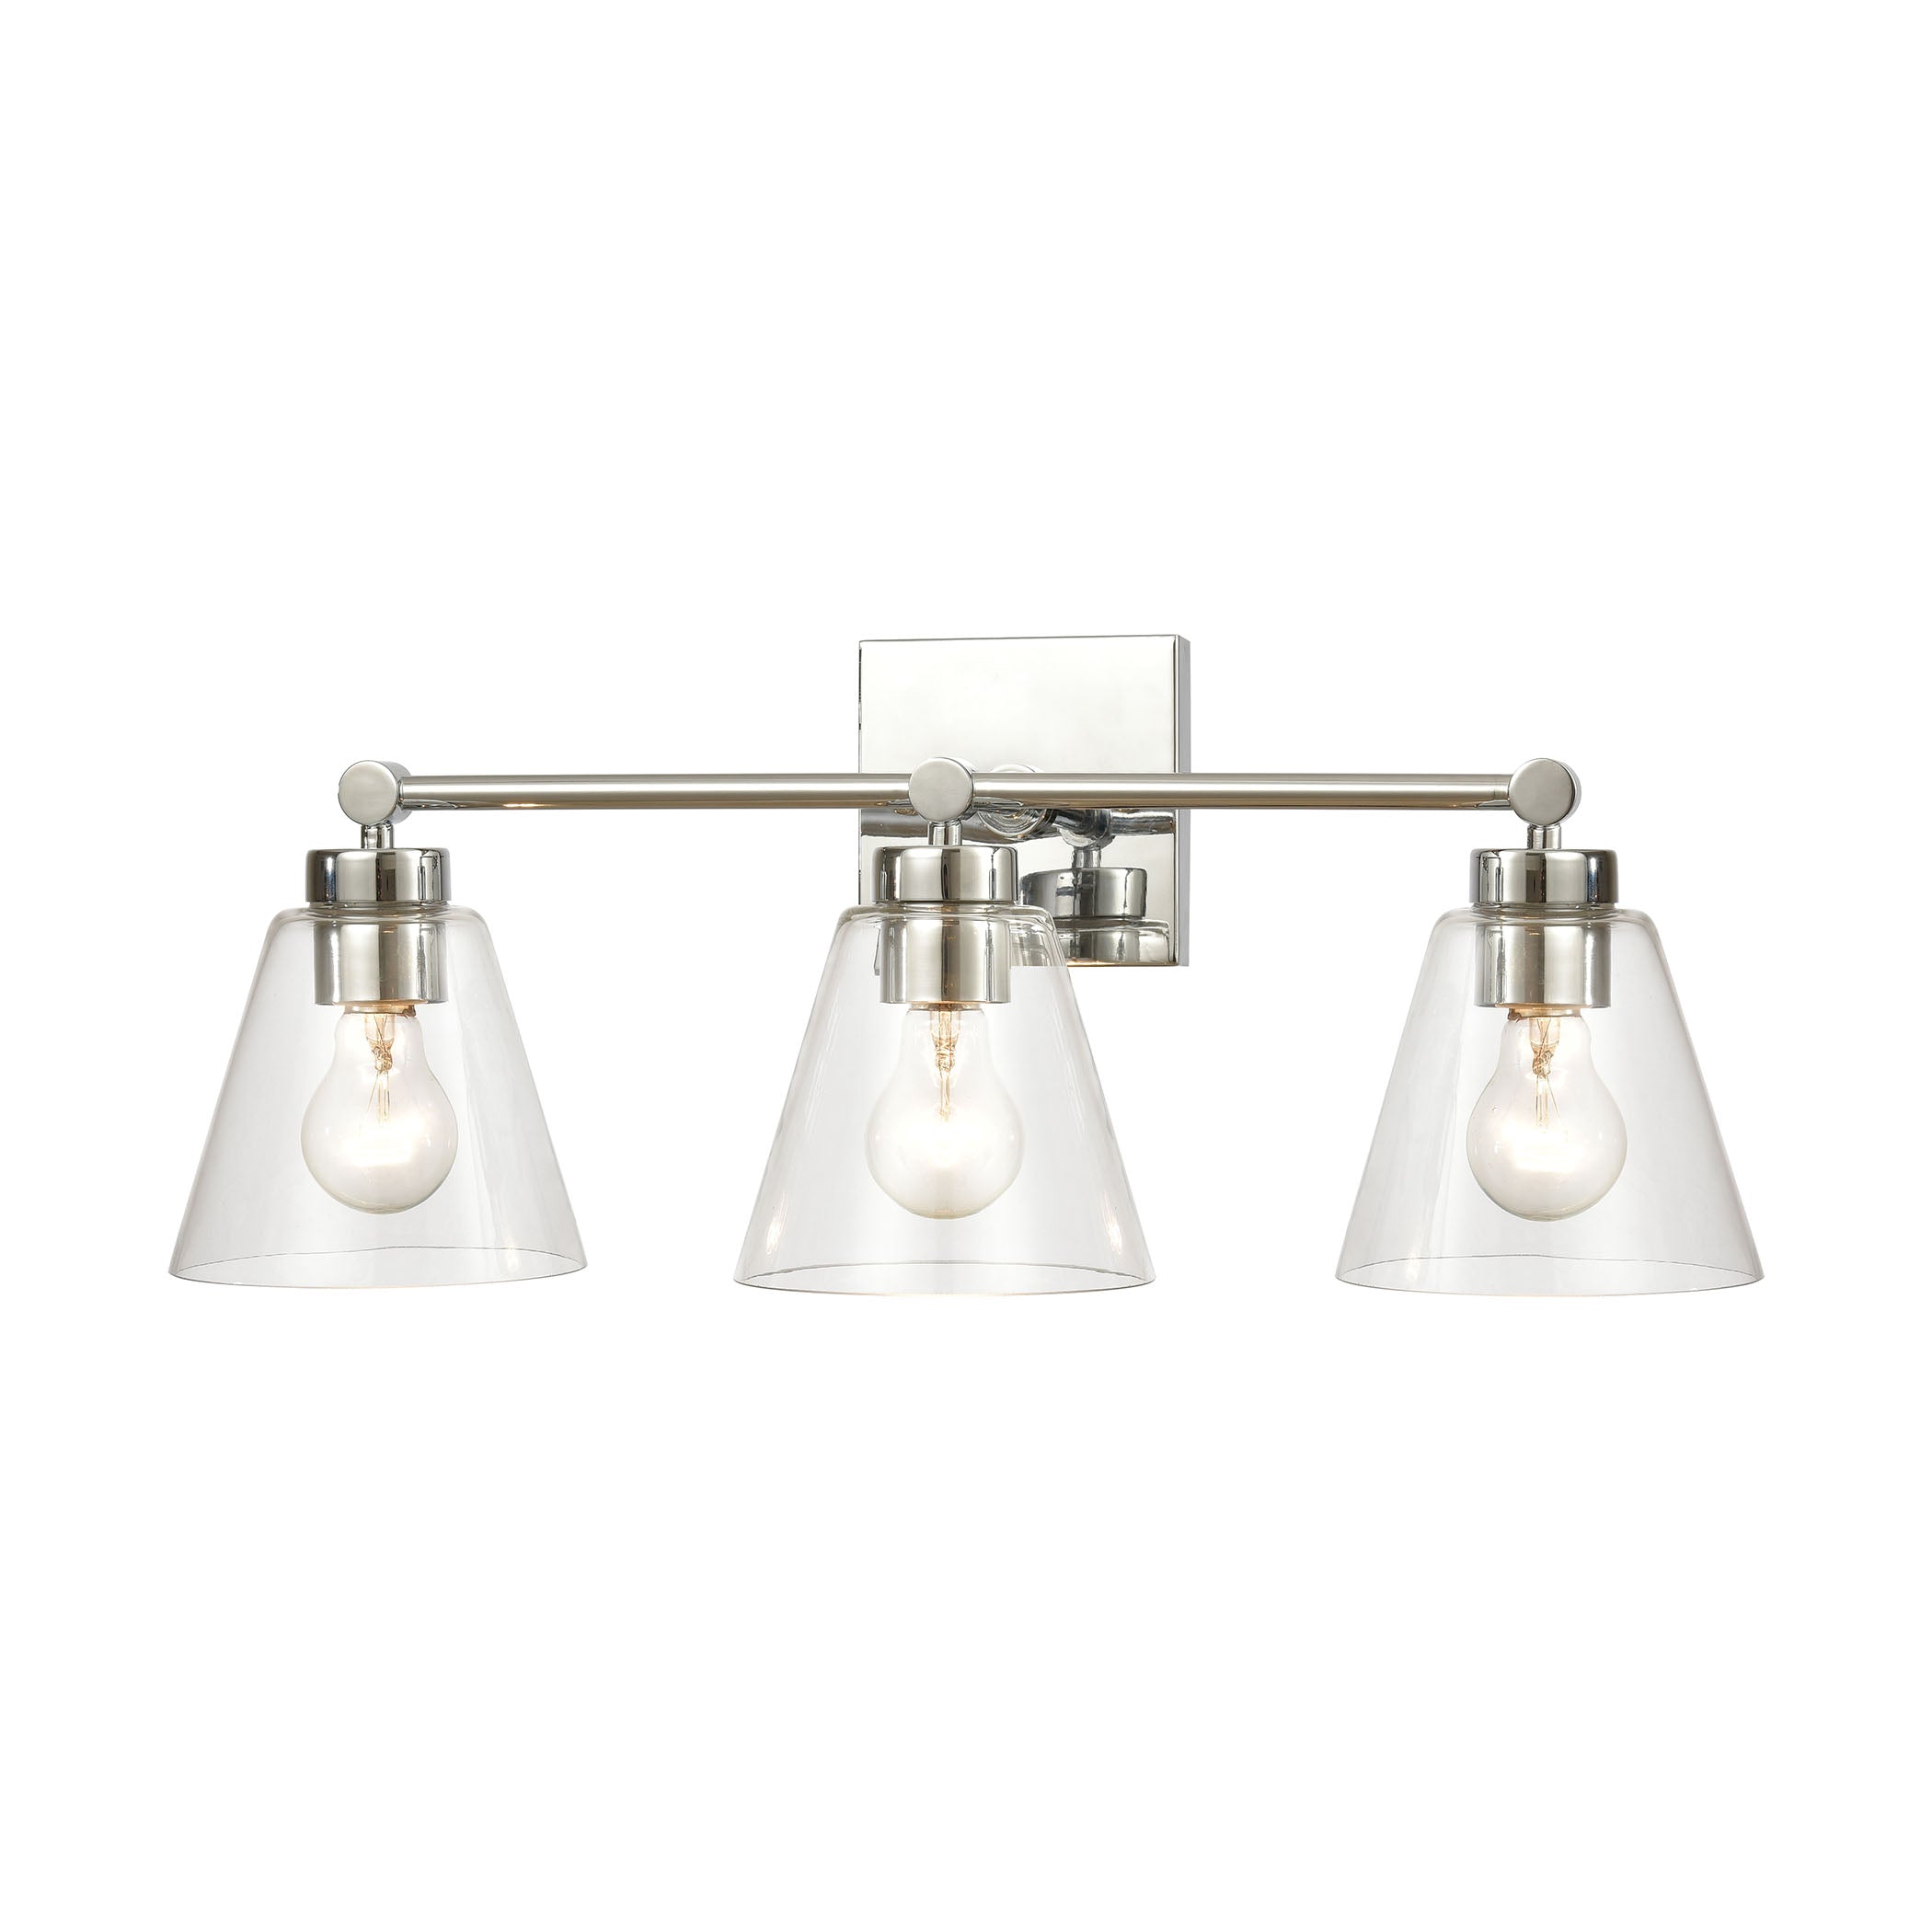 ELK Lighting 18344/3 East Point 3-Light Vanity Light in Polished Chrome with Clear Glass